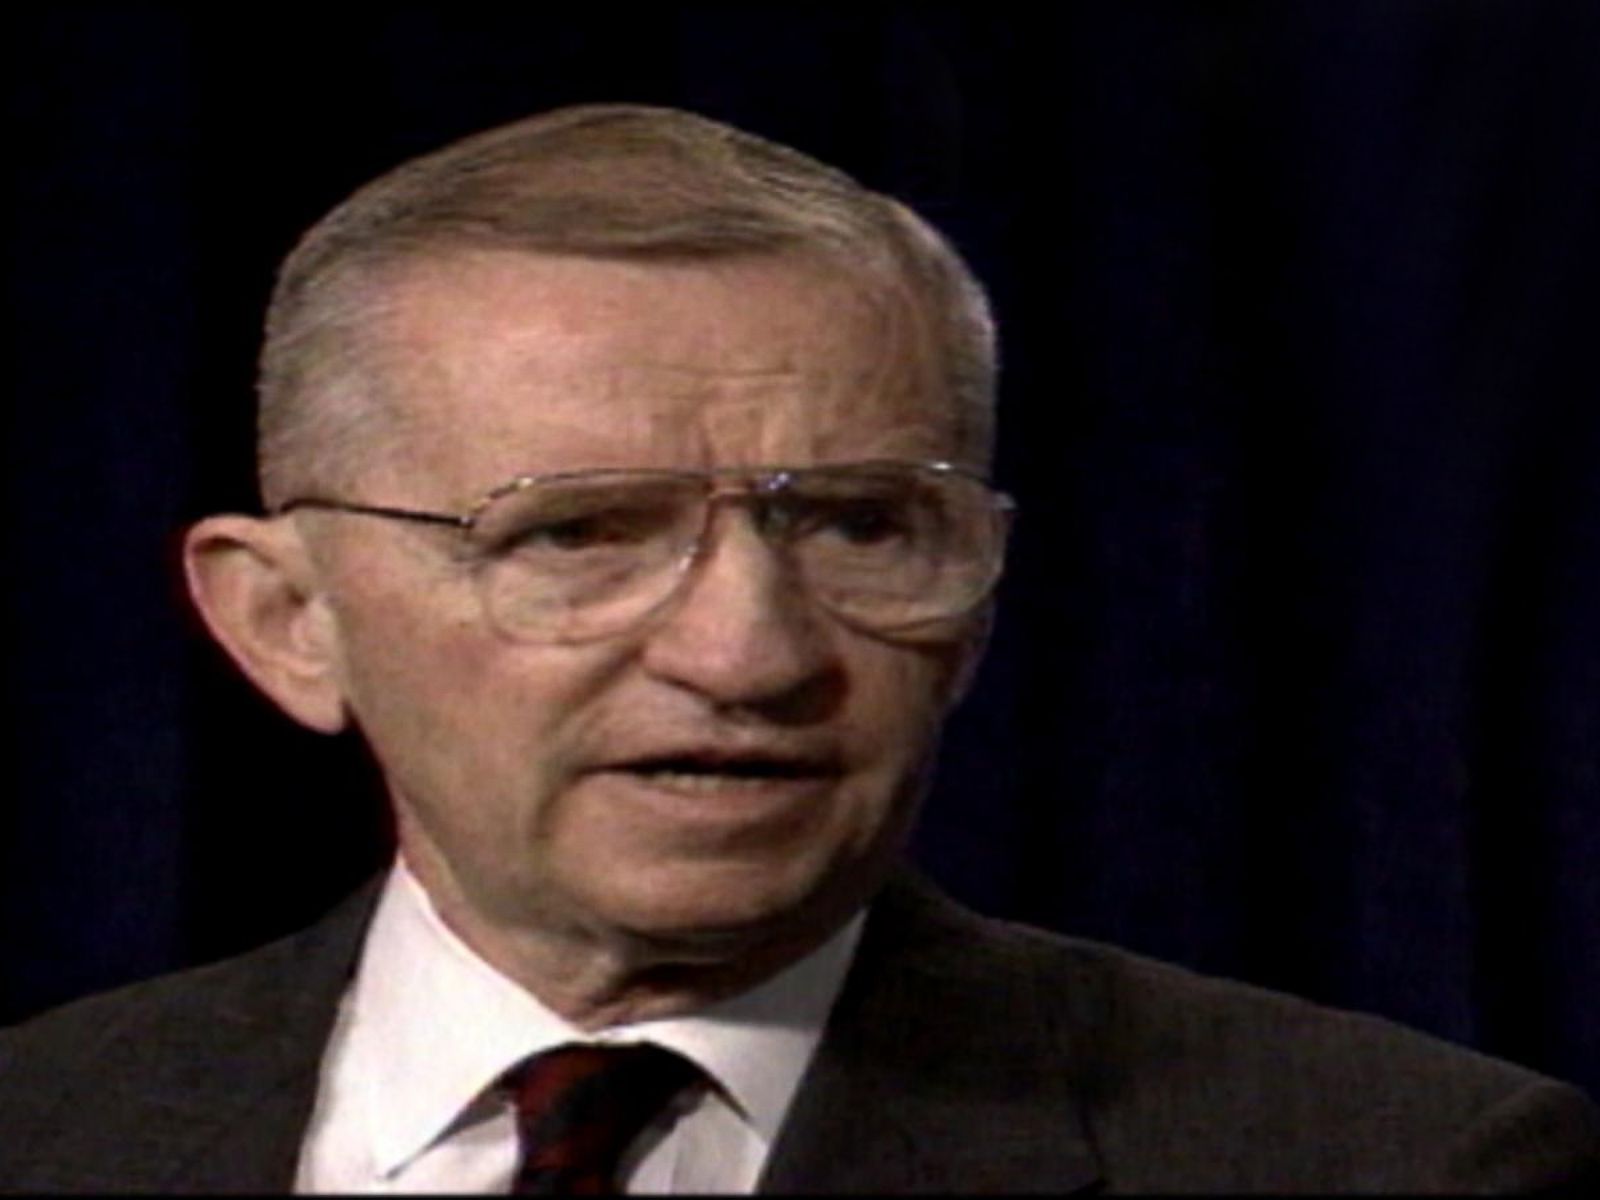 1992 - 8 Days: Bush, Perot Feud Turns Personal